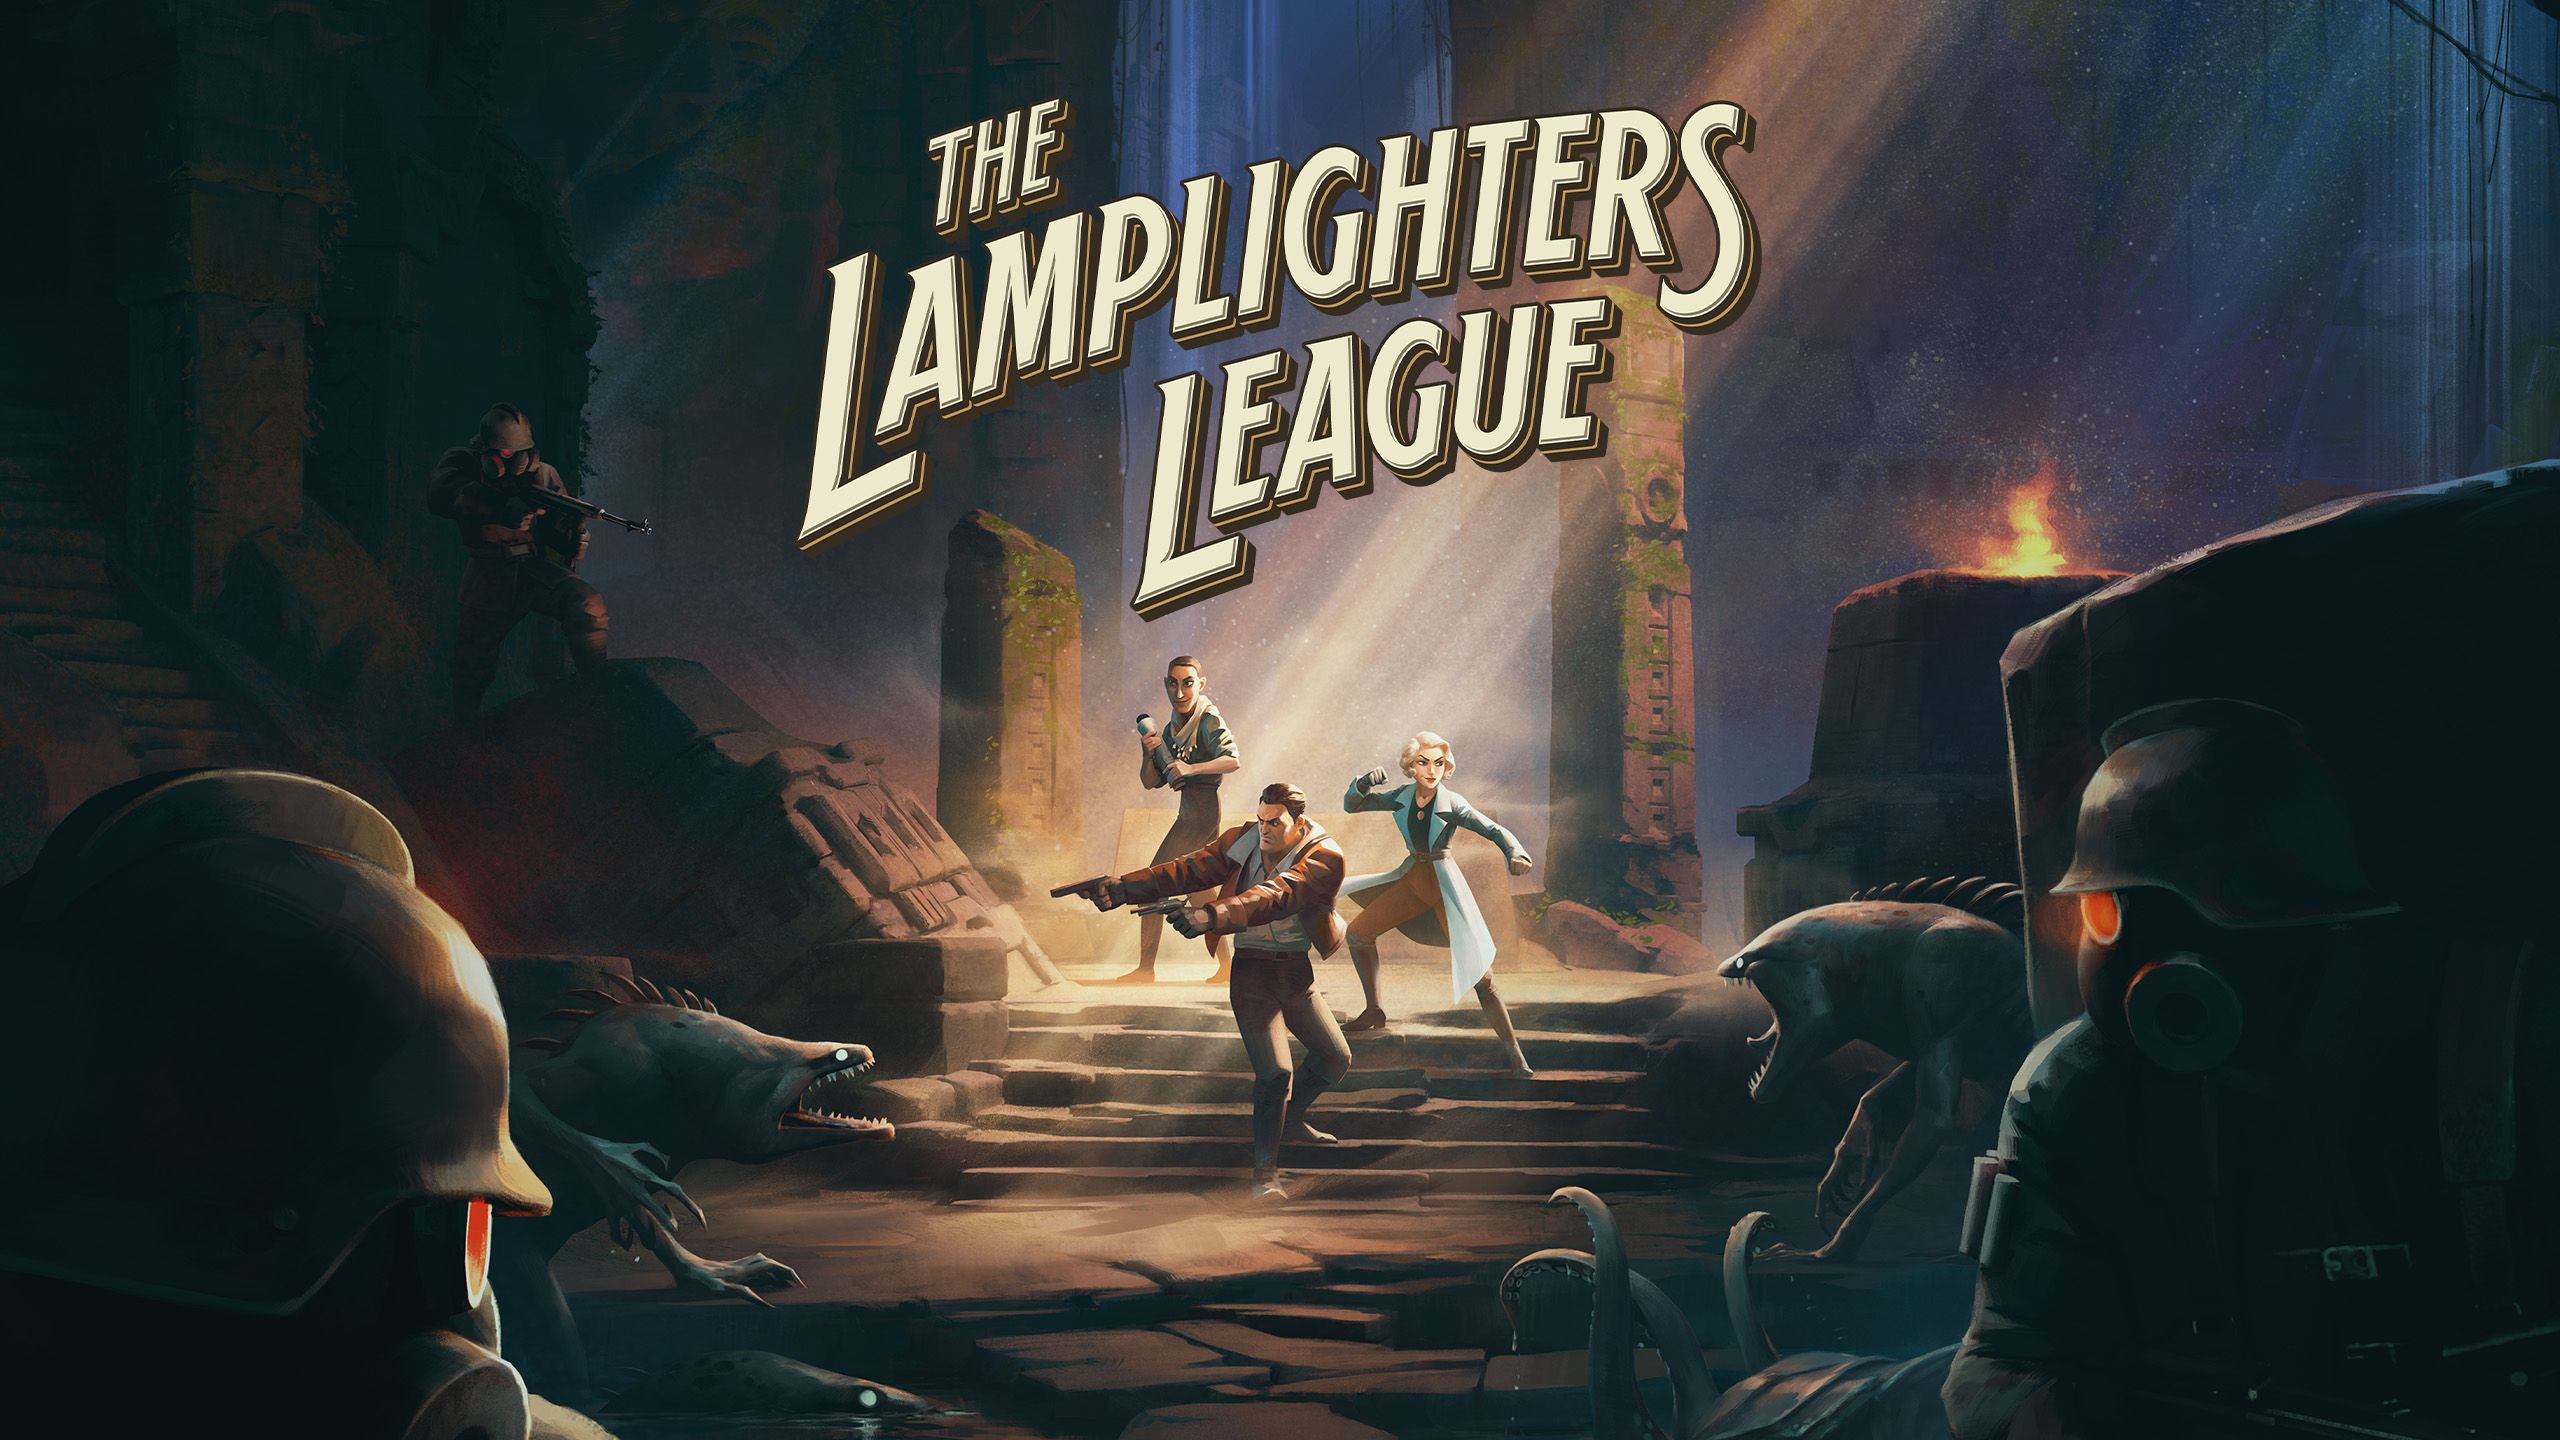 The Lamplighters League for windows instal